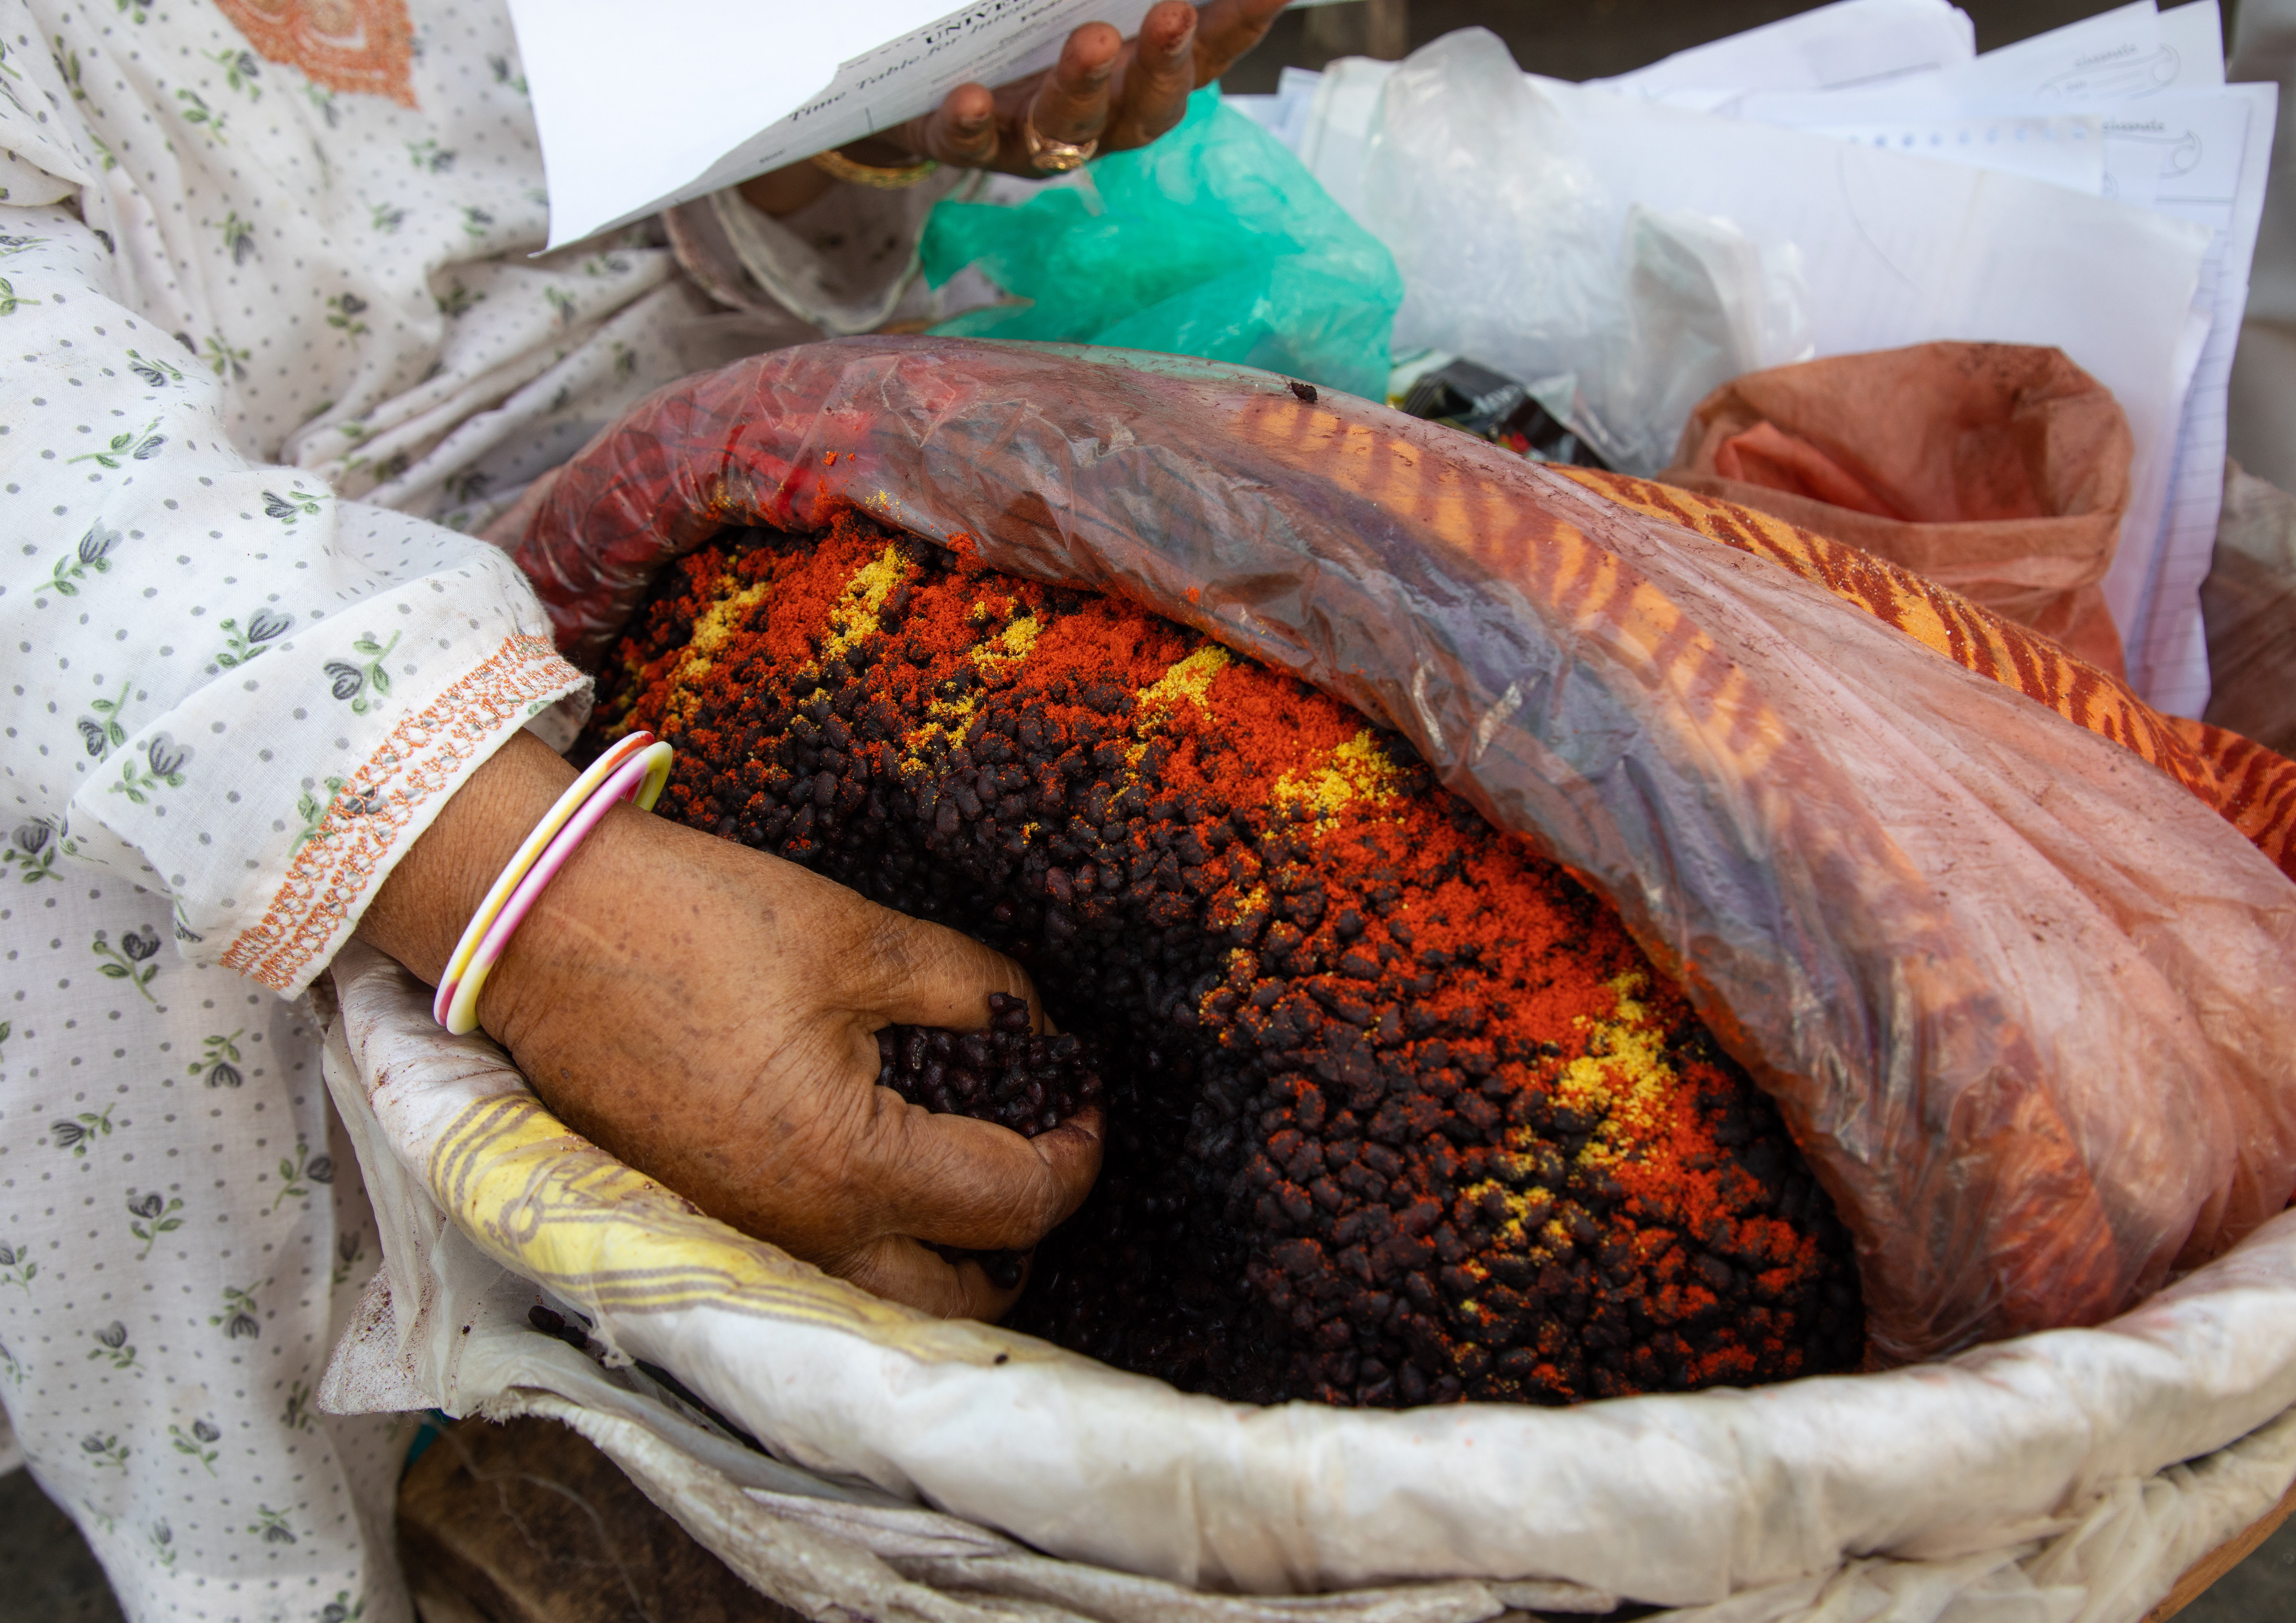 Steamed lentils, or 'waremuth', mixed with vivid spices are sold on the streets of Srinagar